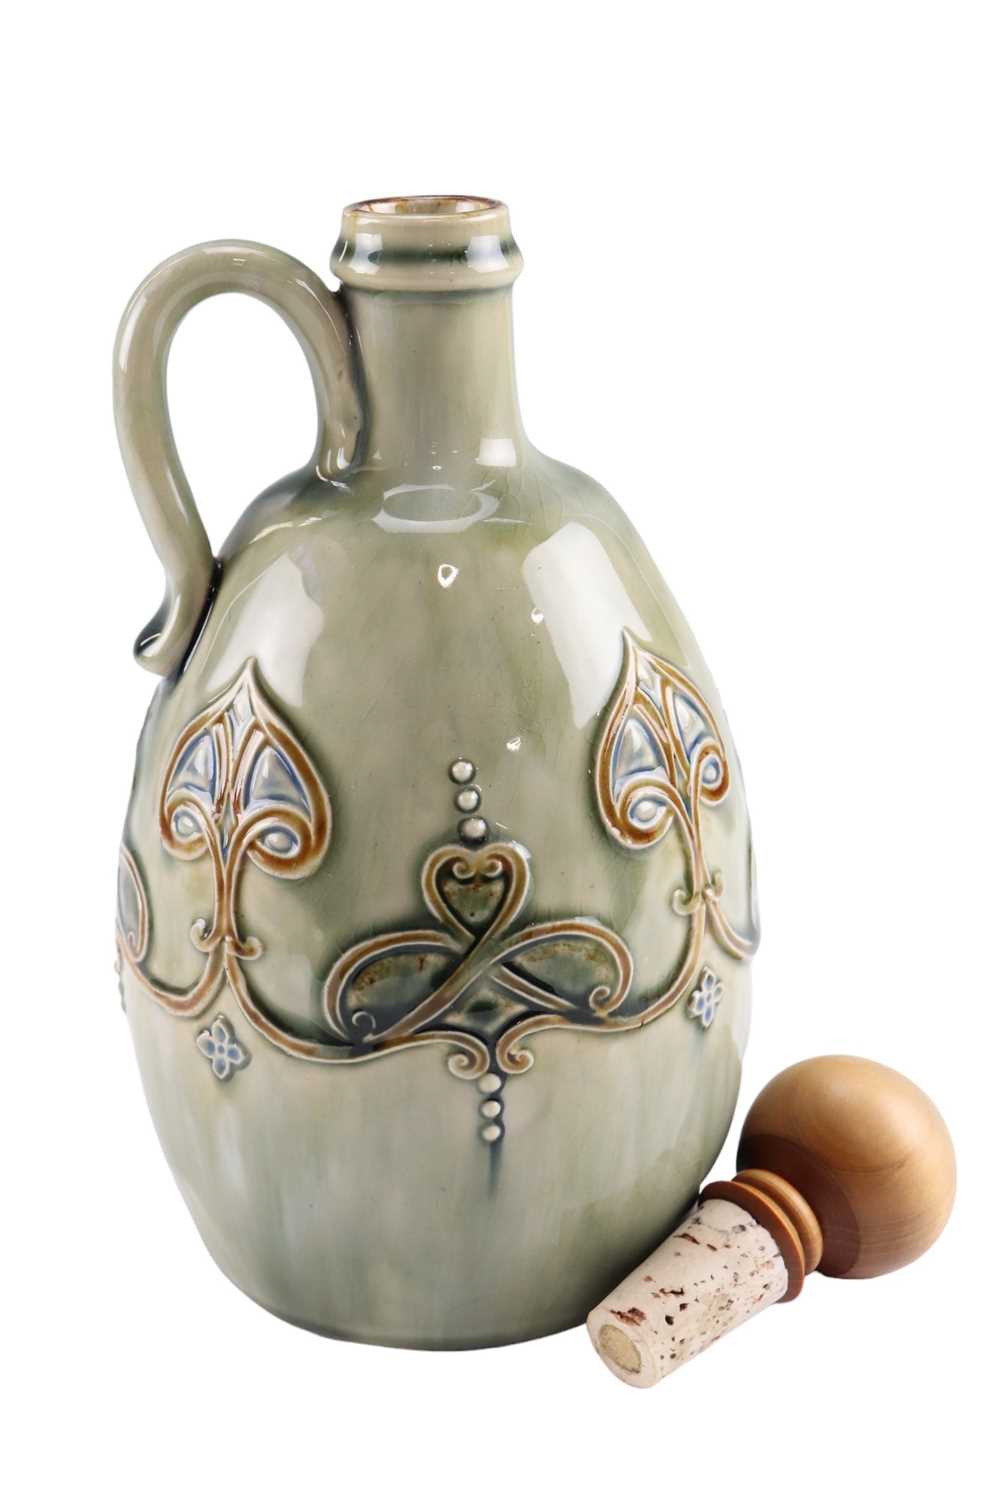 An early 20th Century Royal Doulton glazed earthenware flagon with later turned wood stopper, base - Image 2 of 3